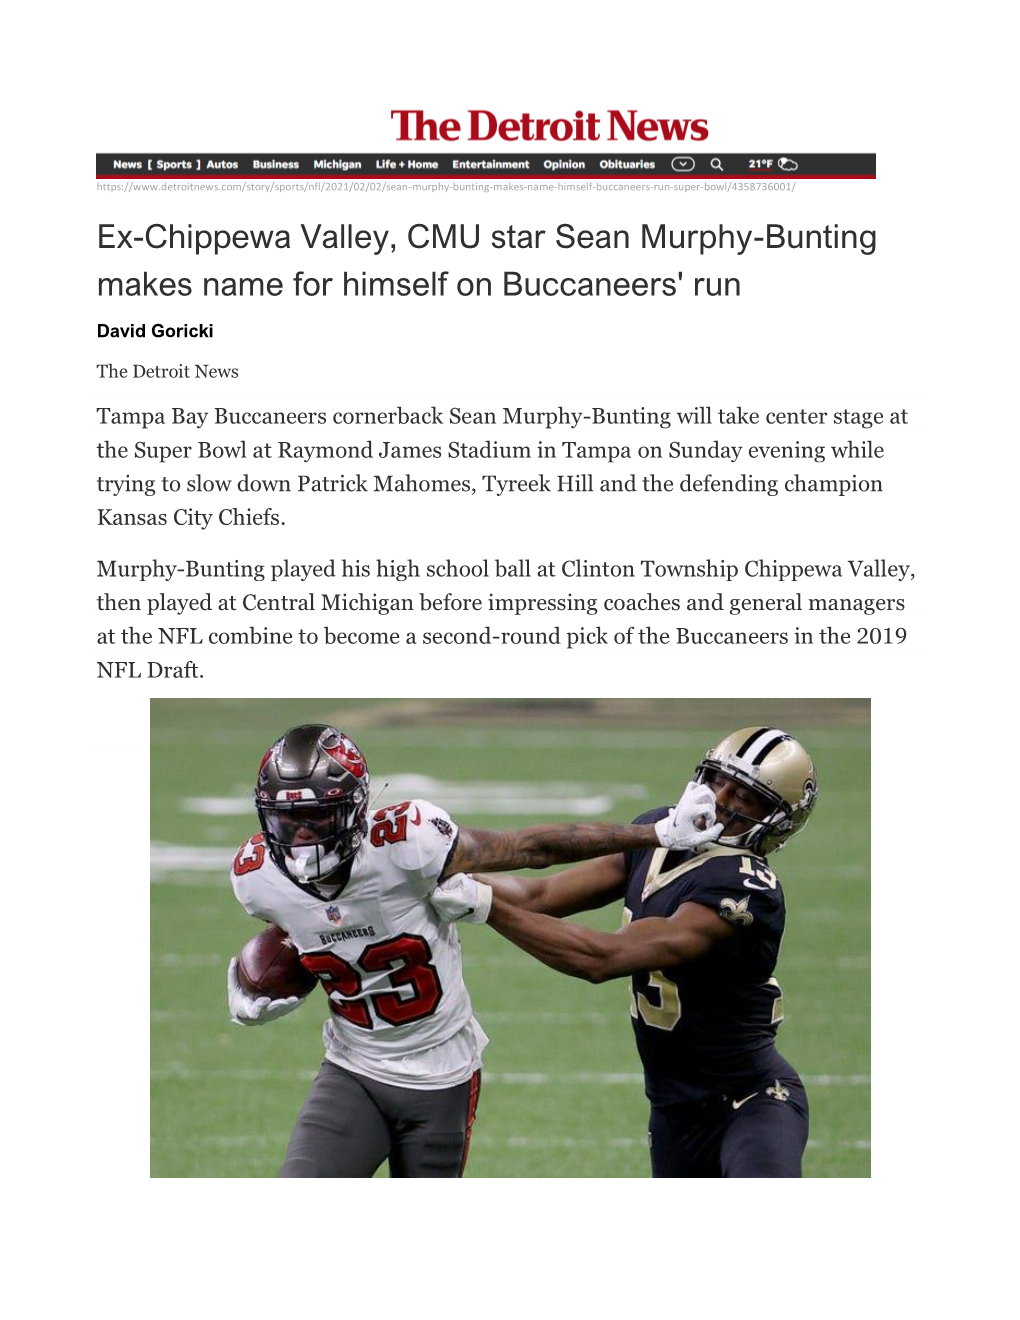 Ex-Chippewa Valley, CMU Star Sean Murphy-Bunting Makes Name for Himself on Buccaneers' Run